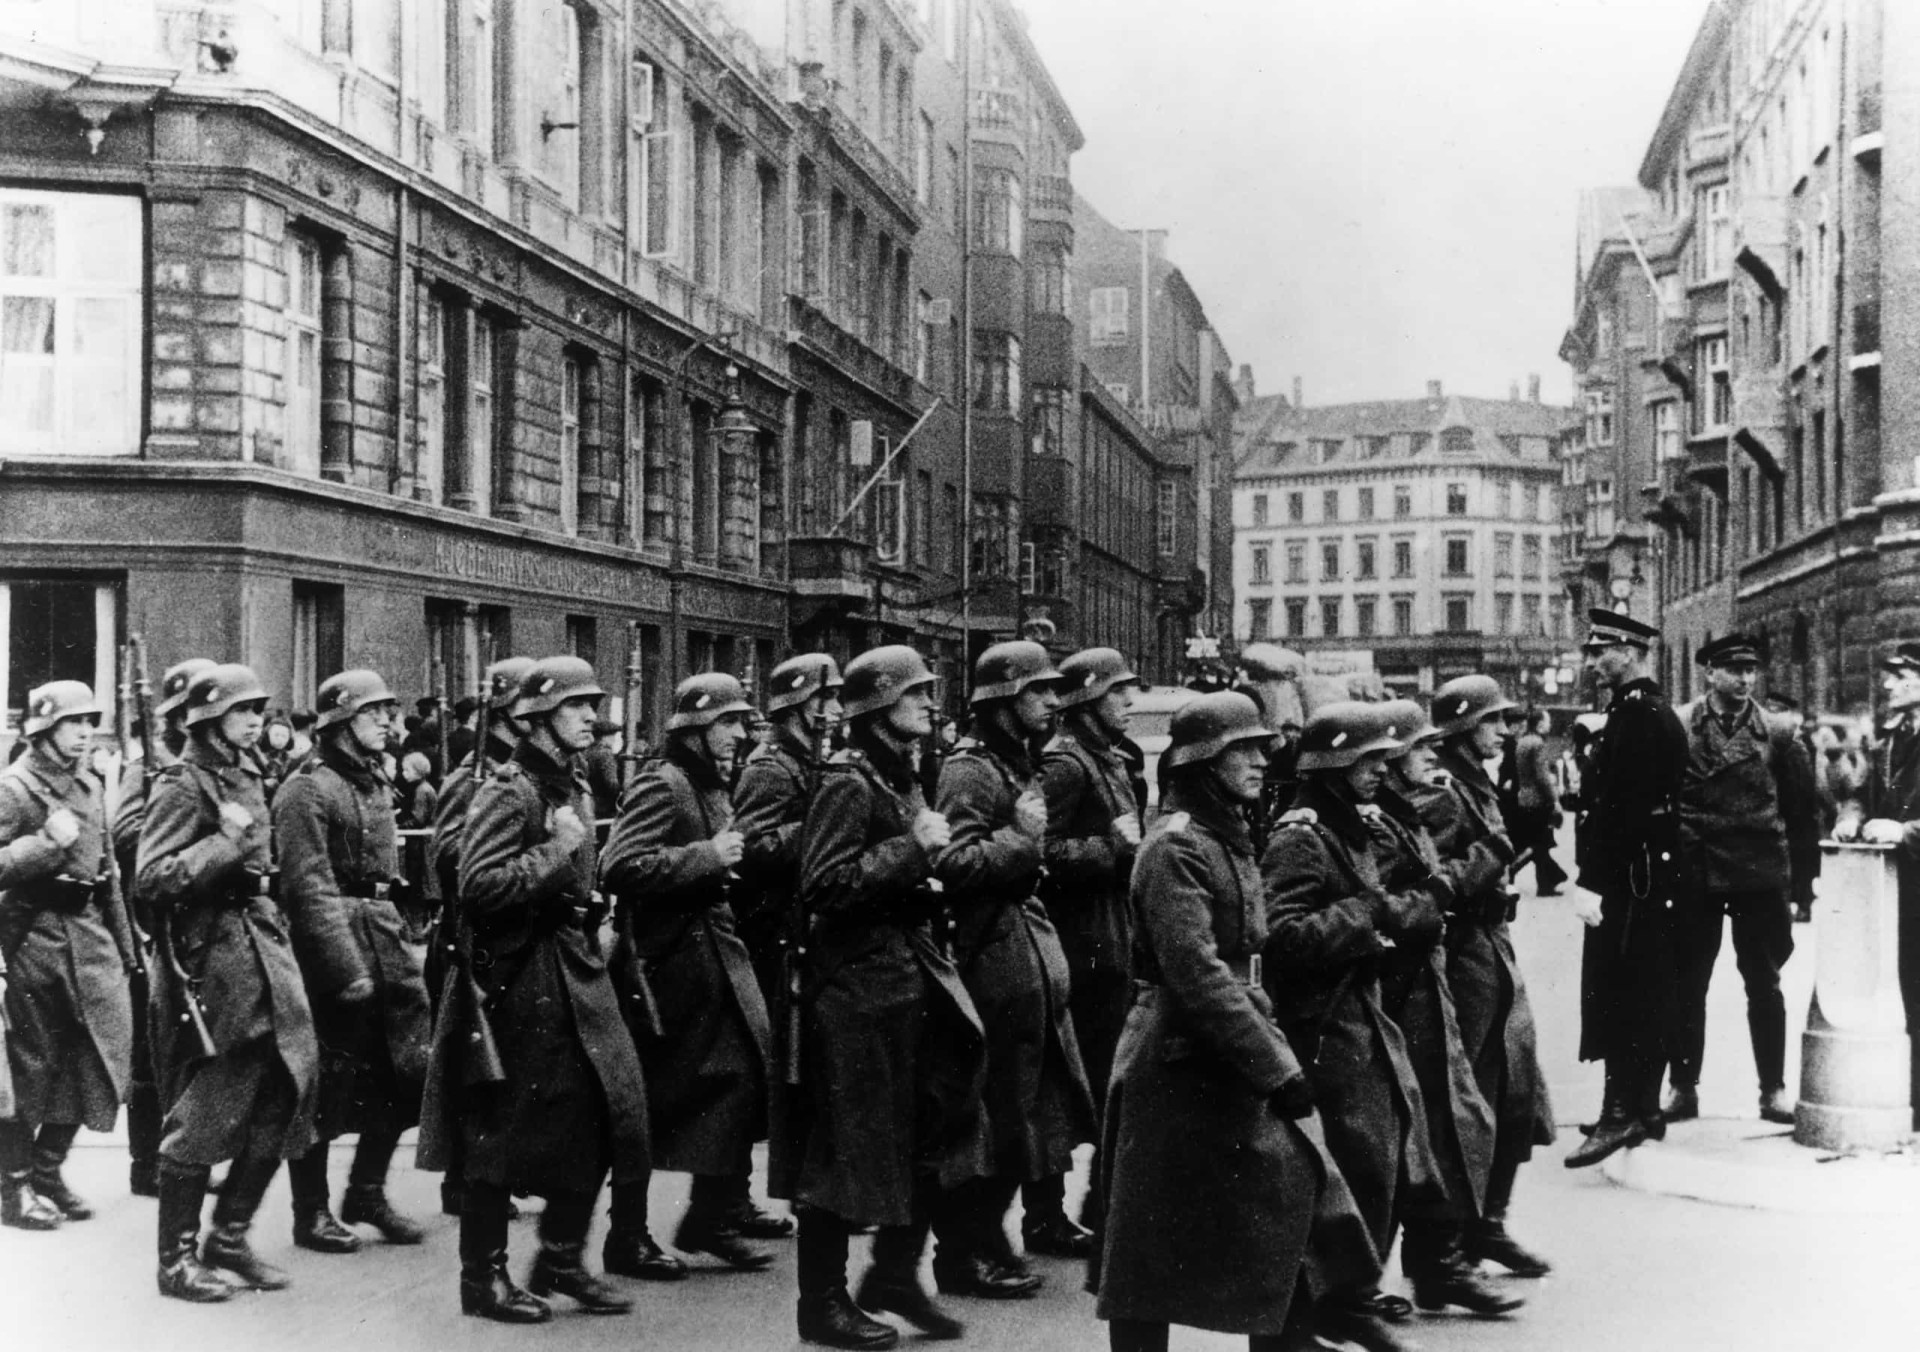 <p>At around 05h00, the minelayer <em>Hansestadt Danzig</em> brought a battalion of the 198th German Infantry to Copenhagen.</p><p><a href="https://www.msn.com/en-my/community/channel/vid-7xx8mnucu55yw63we9va2gwr7uihbxwc68fxqp25x6tg4ftibpra?cvid=94631541bc0f4f89bfd59158d696ad7e">Follow us and access great exclusive content every day</a></p>